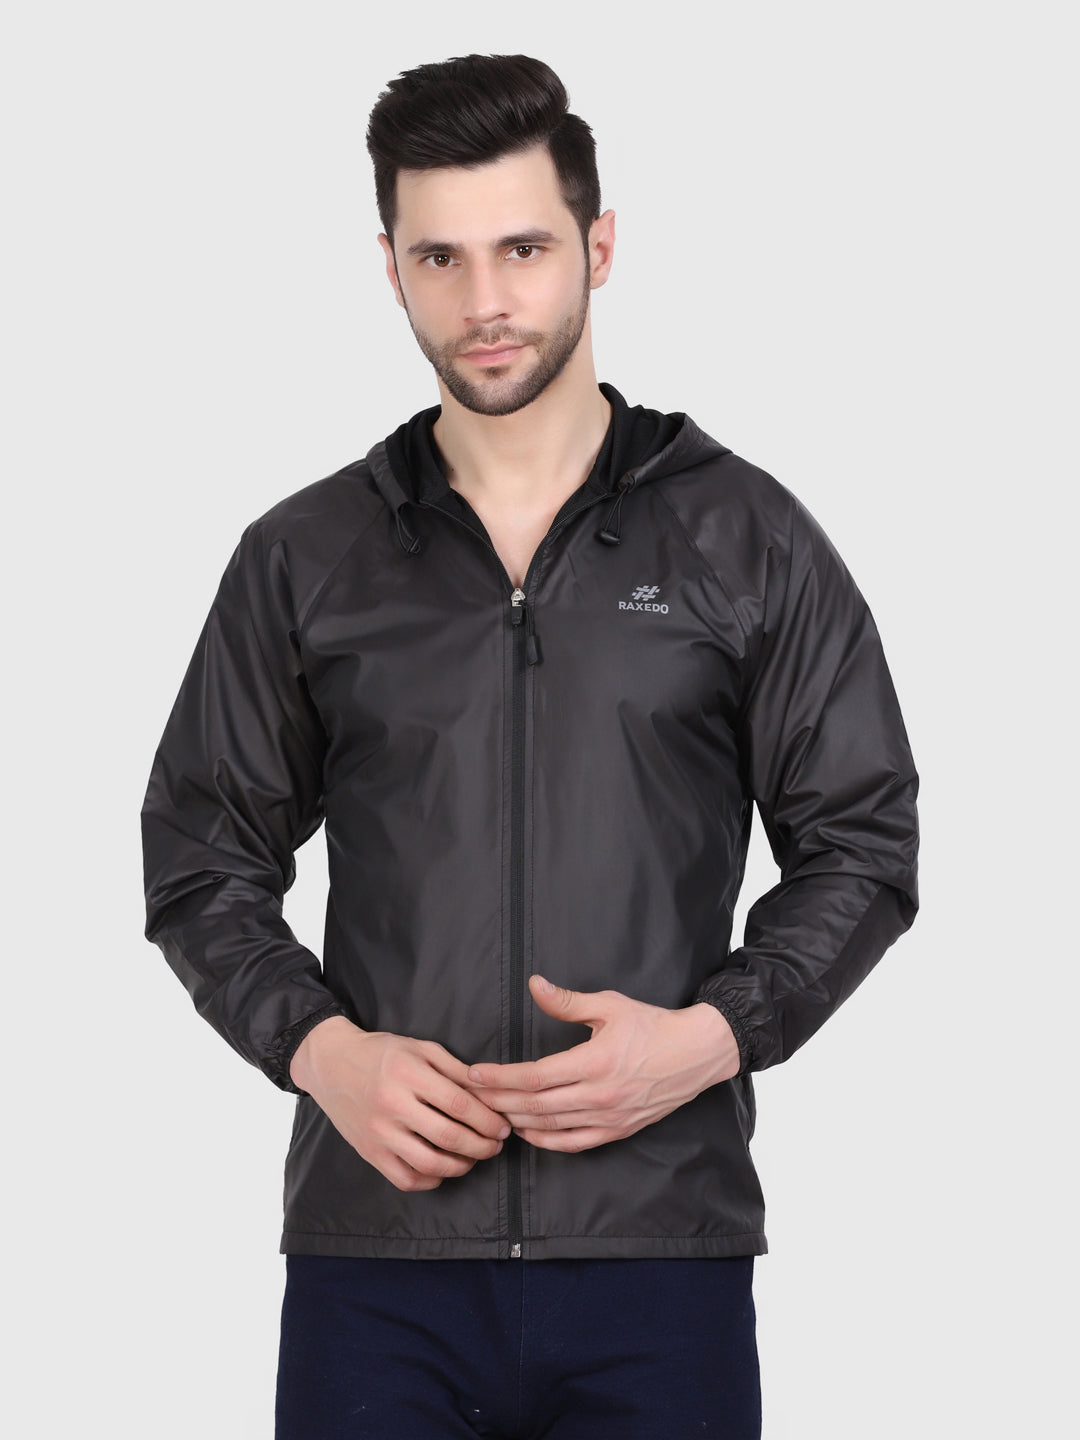 Dry FIT Lightweight Unisex Hooded Jacket